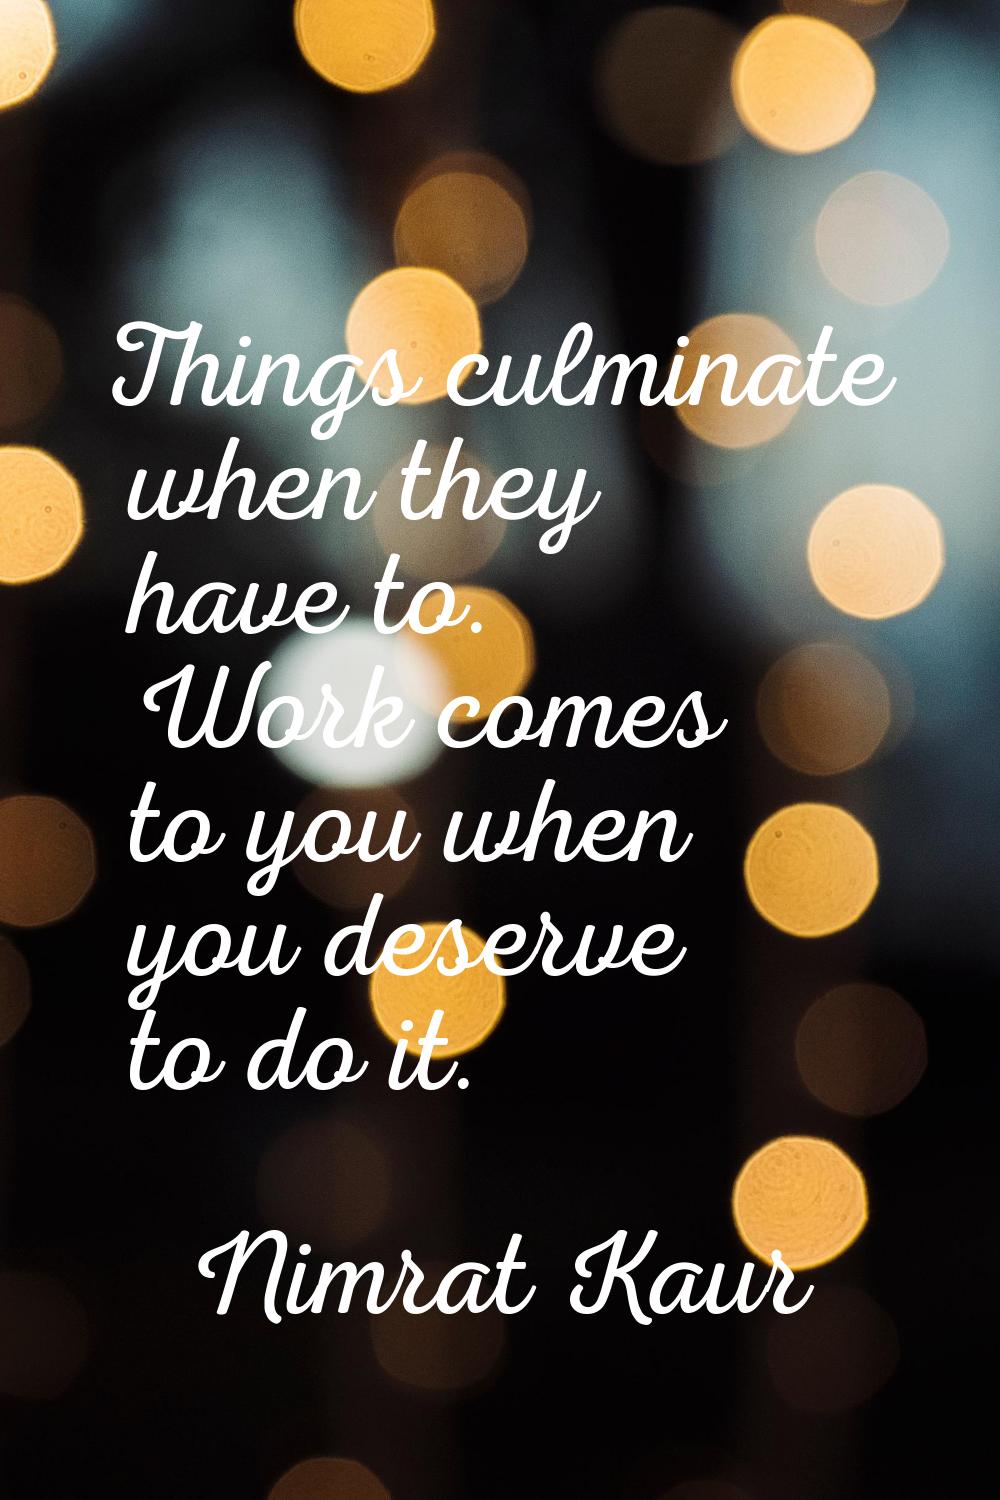 Things culminate when they have to. Work comes to you when you deserve to do it.